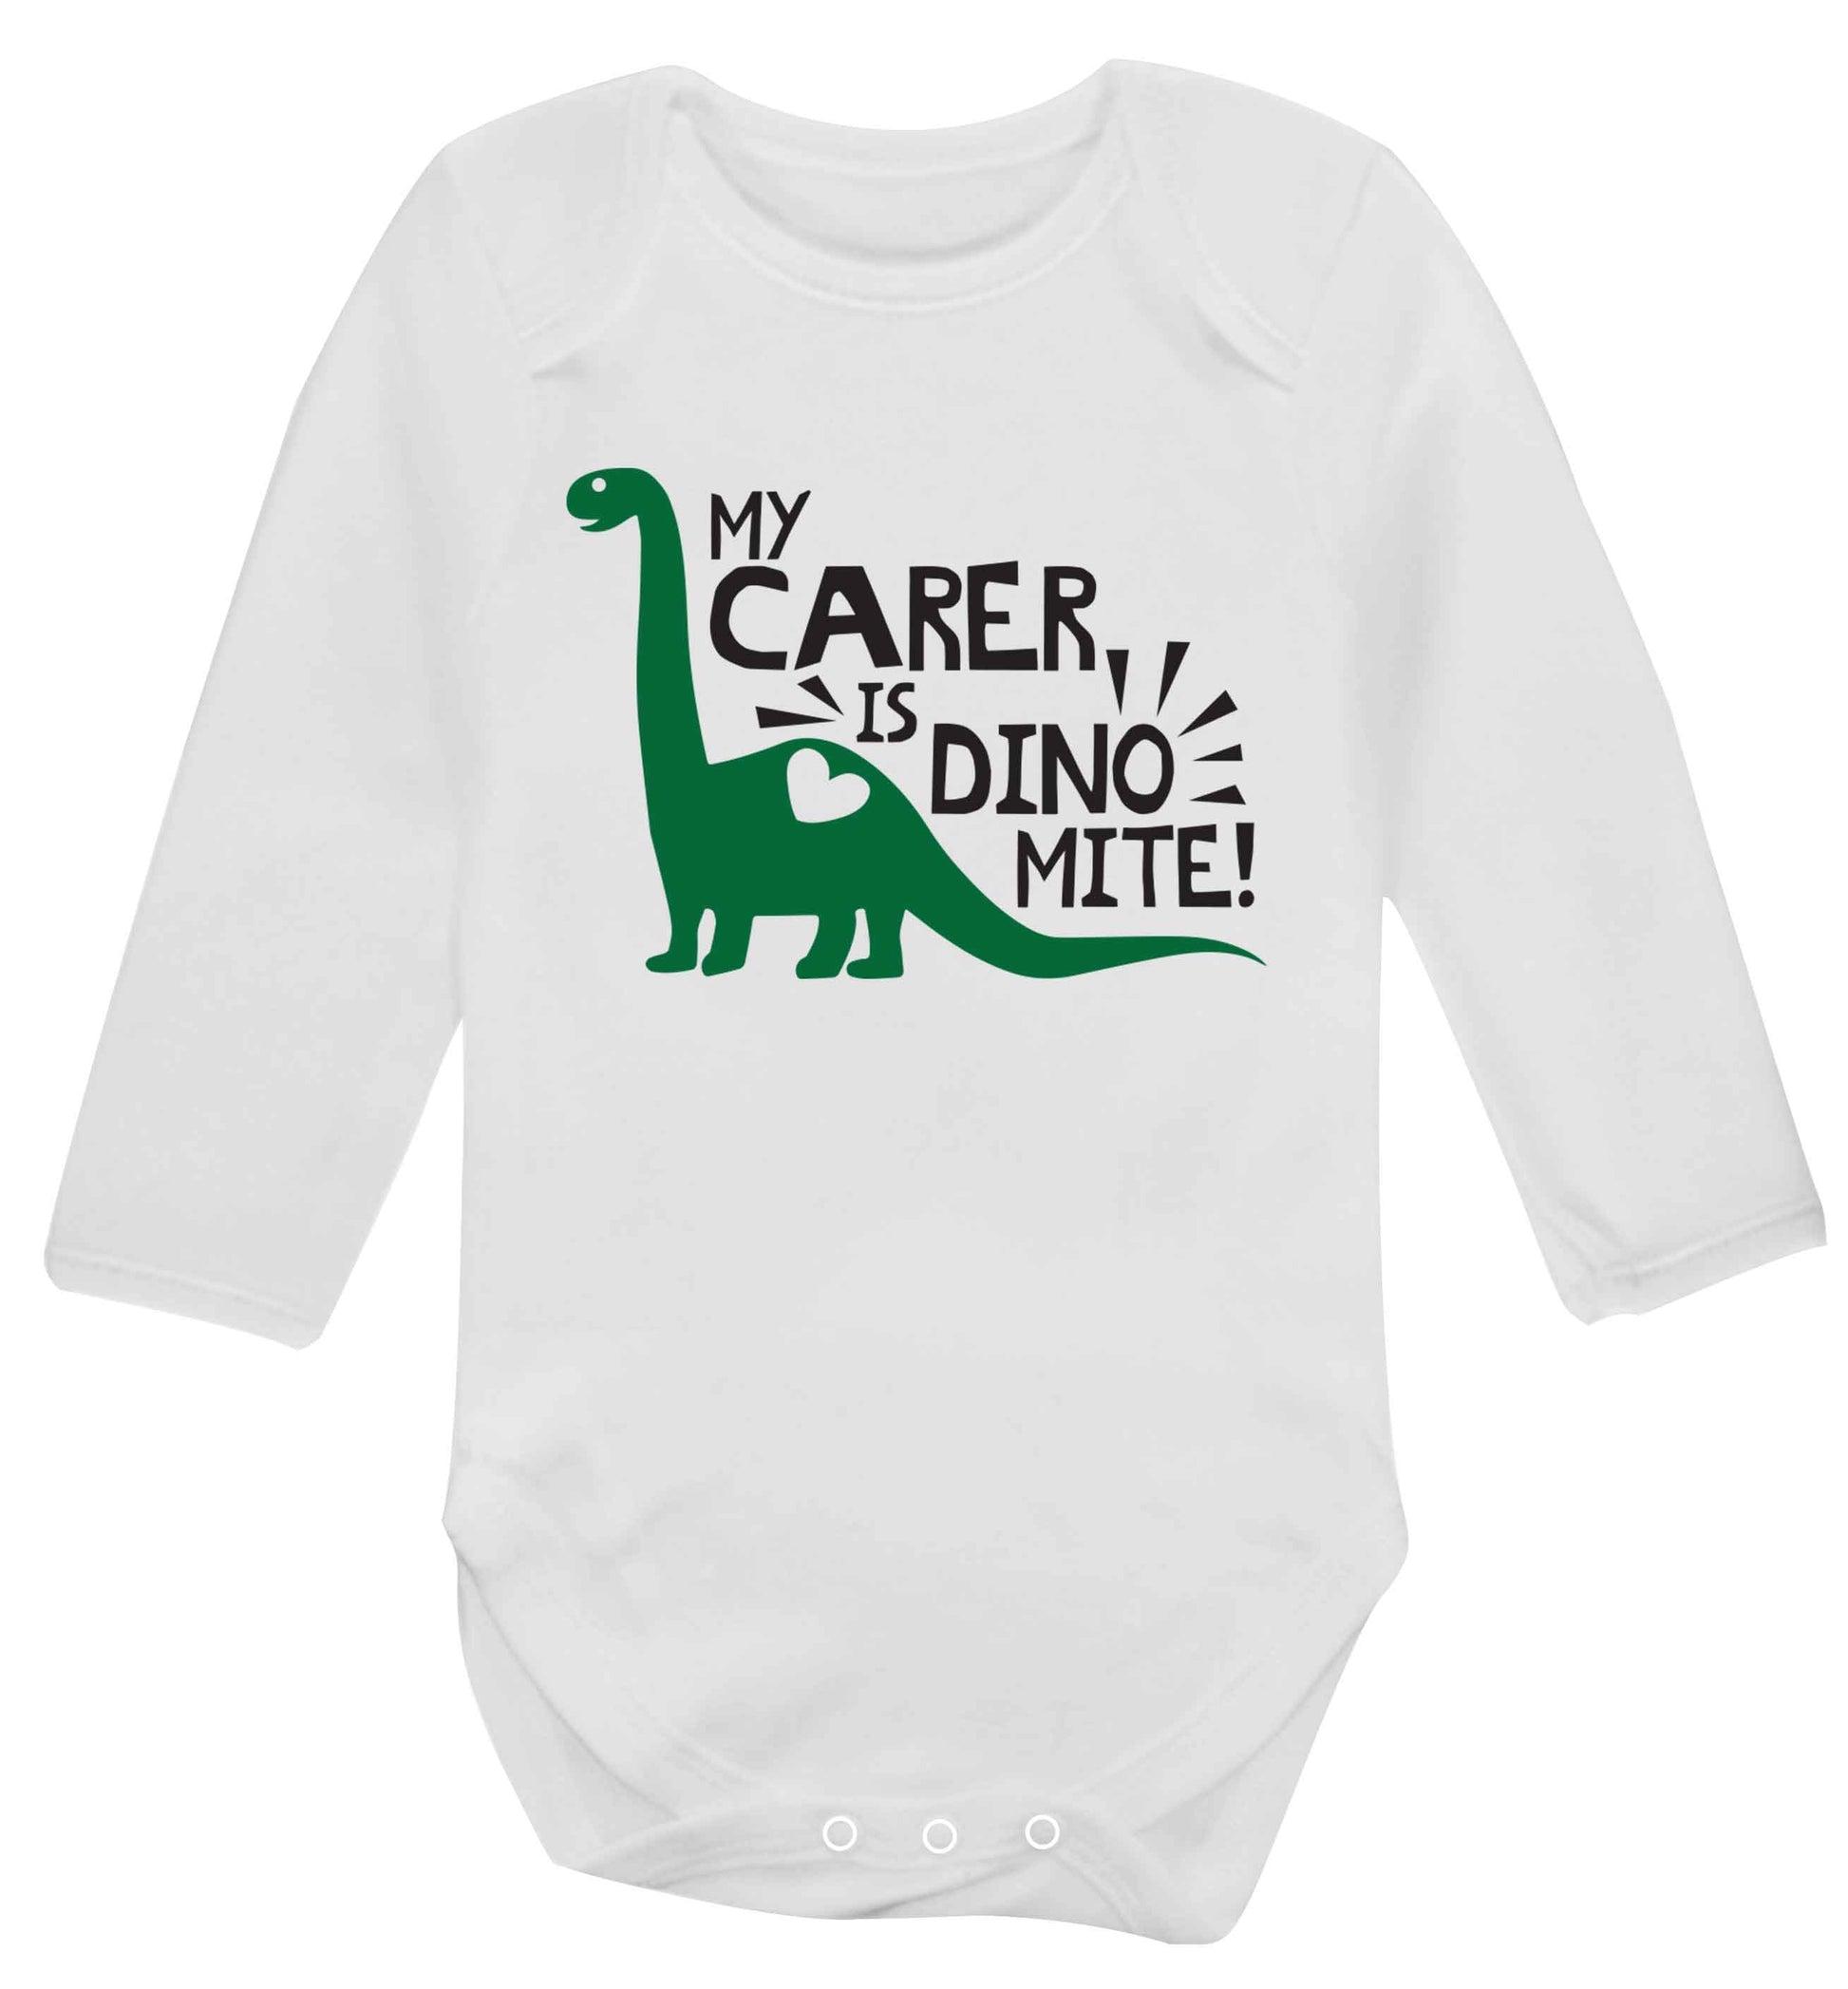 My carer is dinomite! Baby Vest long sleeved white 6-12 months